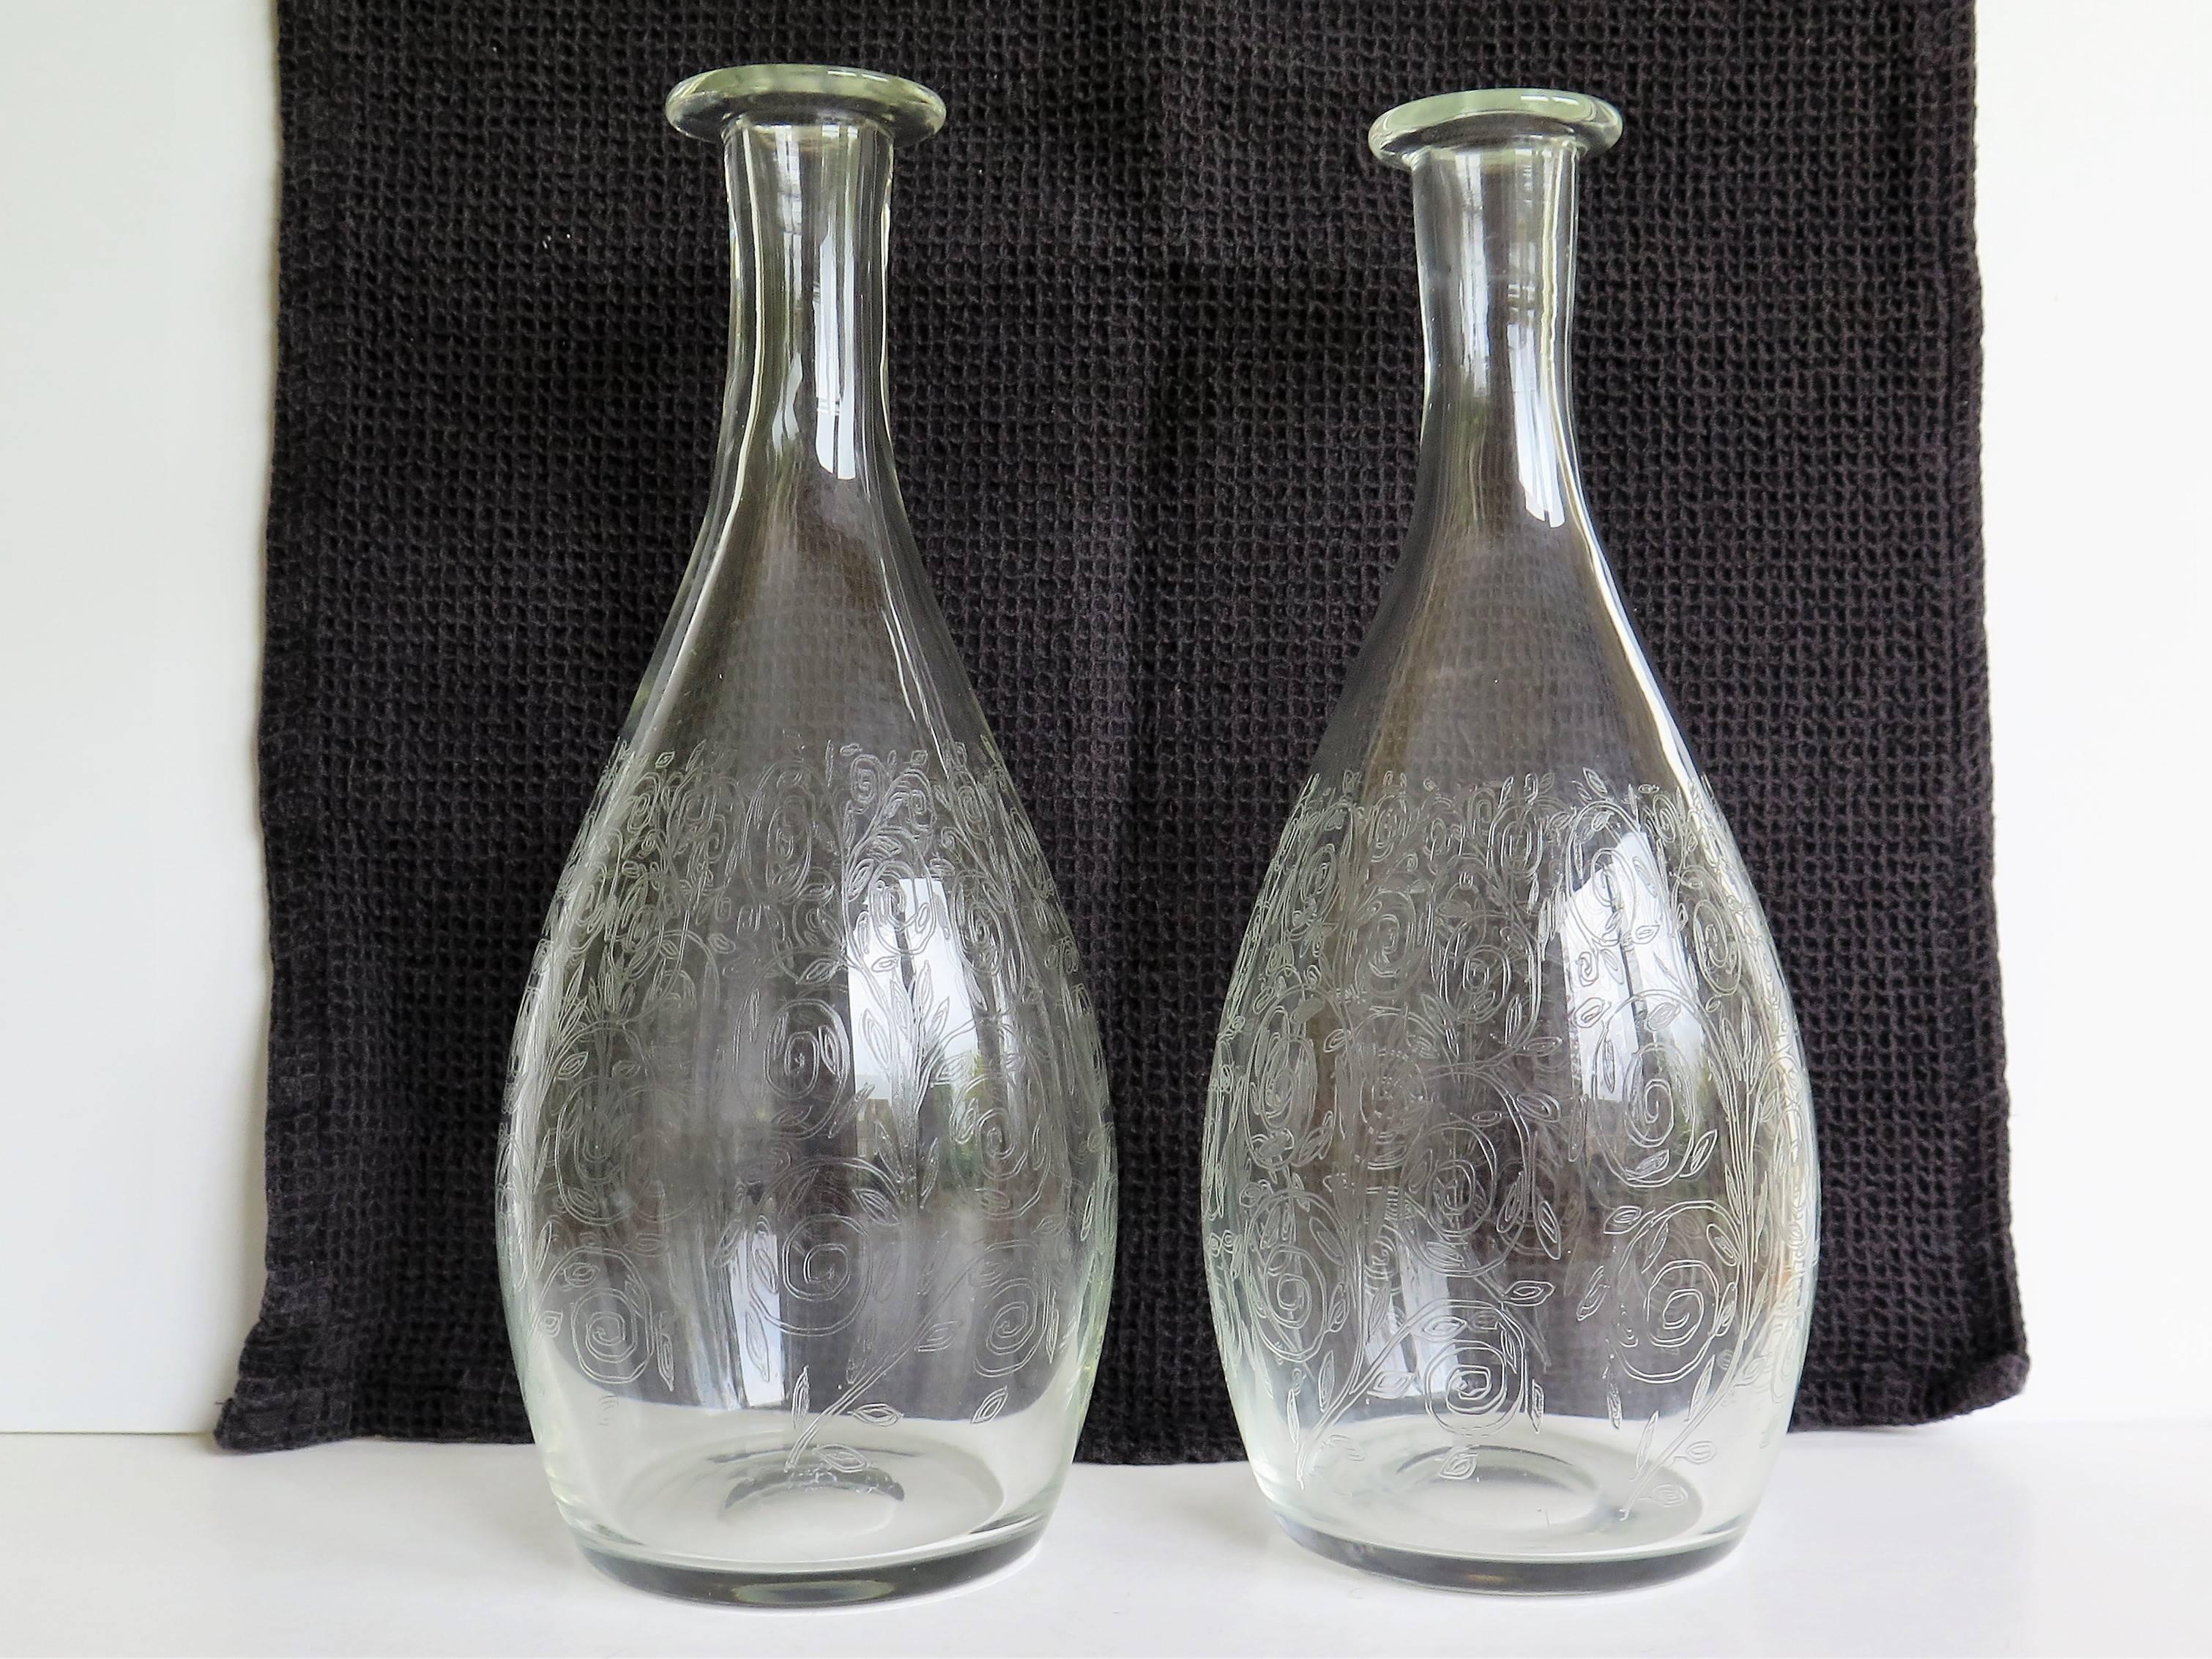 These are a fine pair of hand-blown, English, lead glass carafes, jugs, decanters or bottle vases dating to the 19th Century.

The carafes / vases are bottle shaped, tapering to the neck with nicely lipped rims. They have ground out pontil marks to